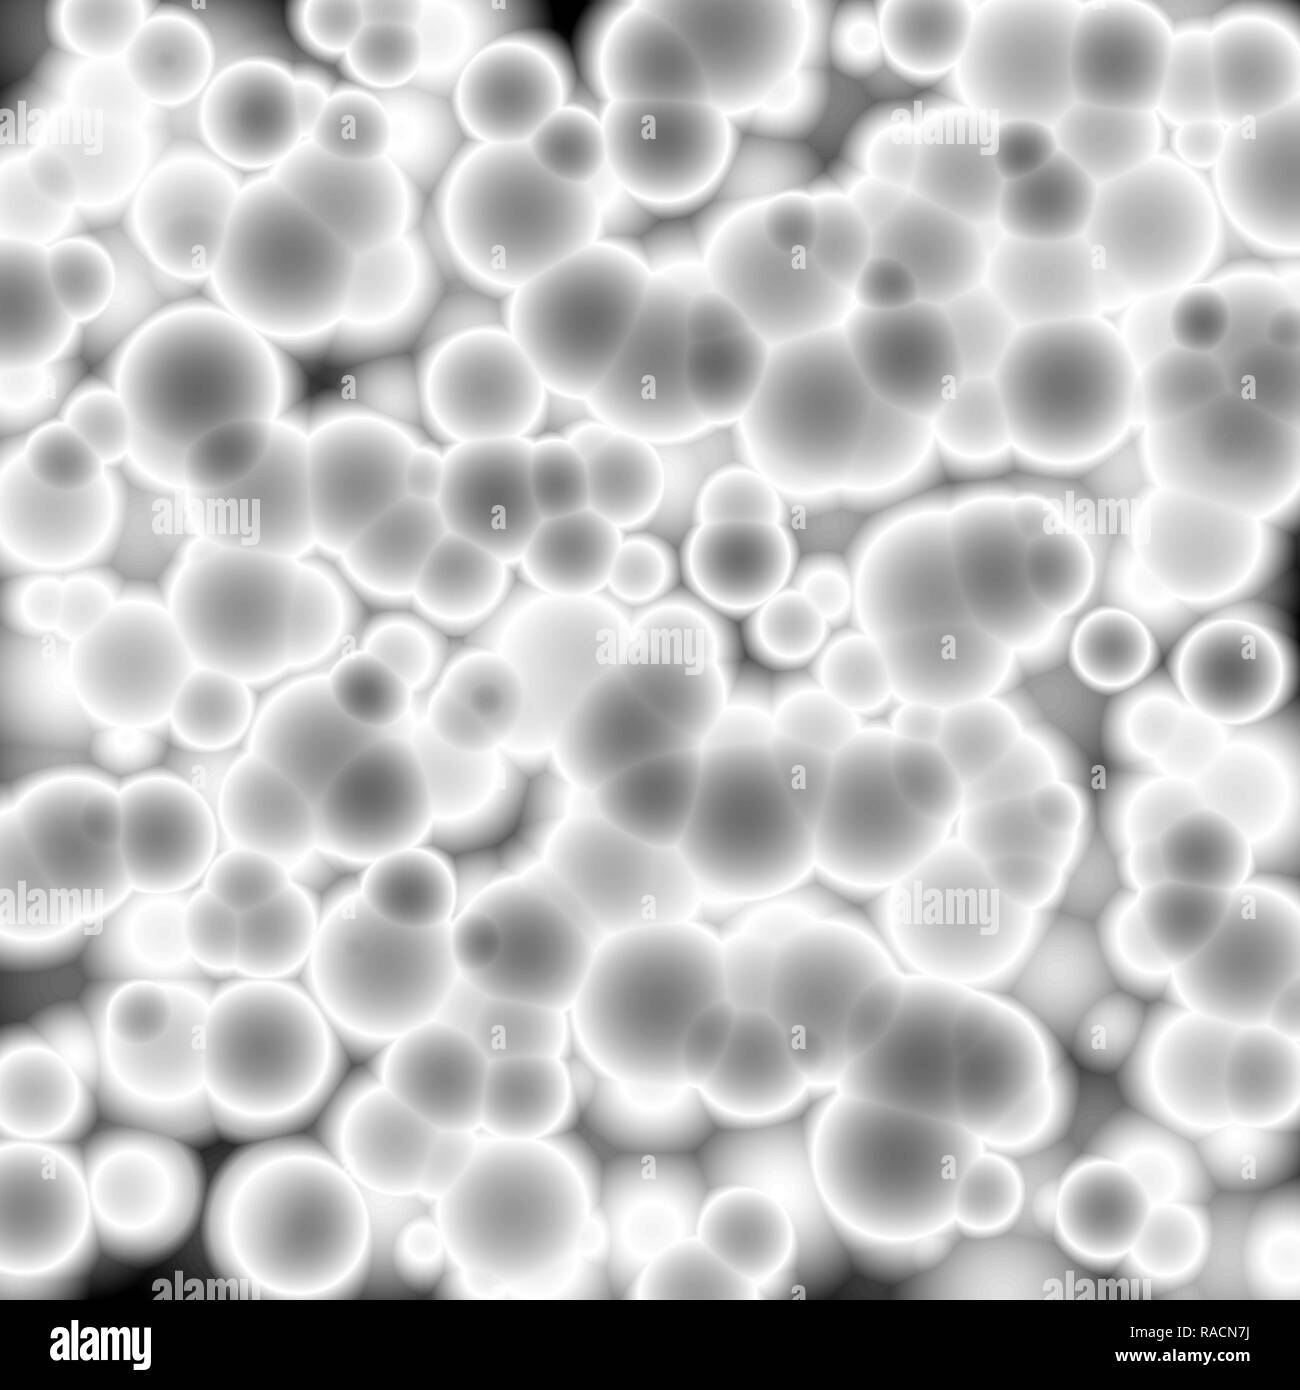 White virus cell under the microscope, abstract background Stock Photo